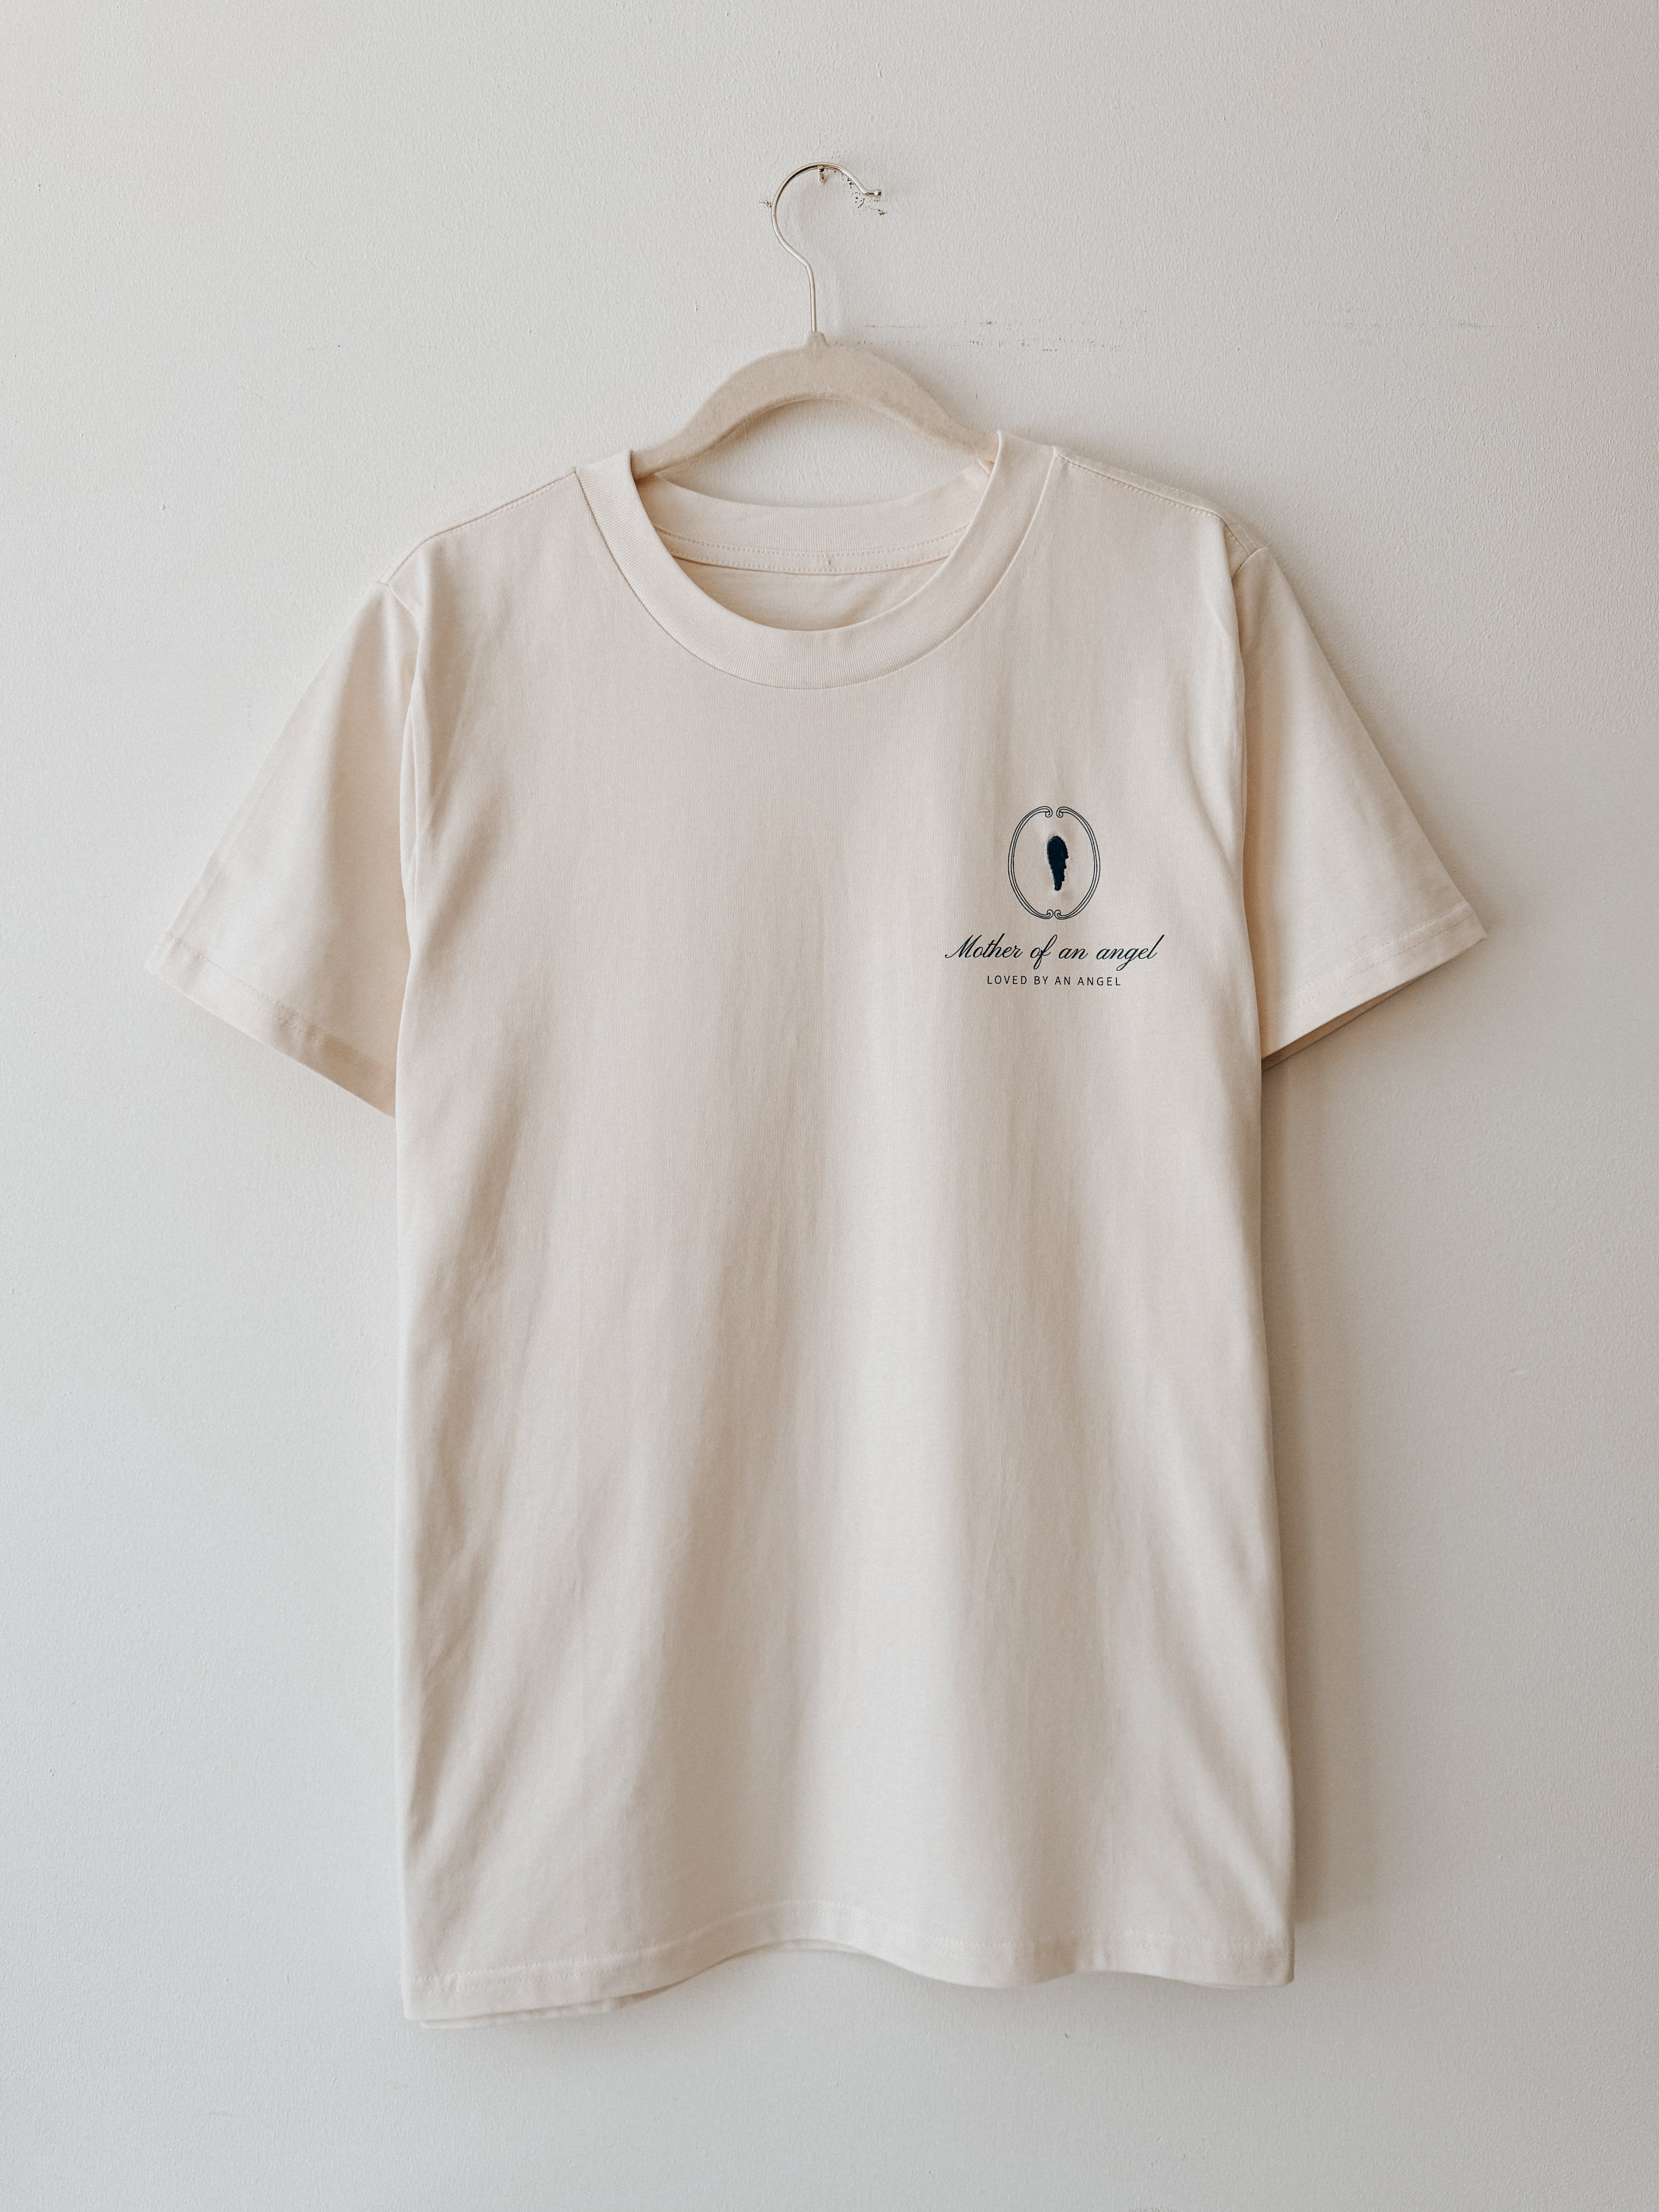 Classic Tee | Mother Of An Angel Crest